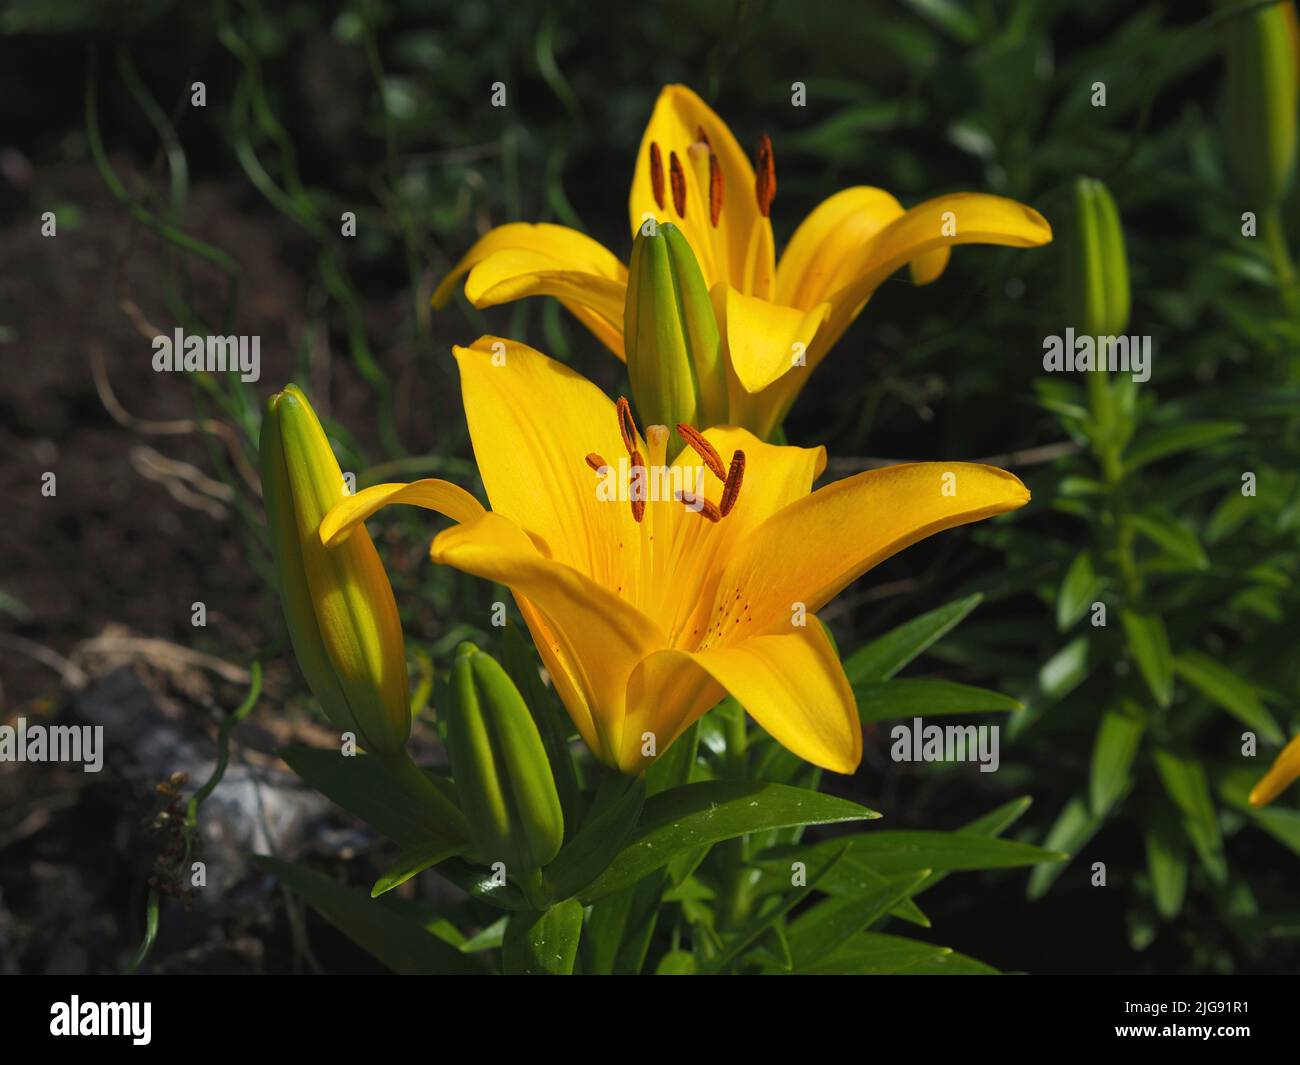 Pure buttery yellow flower of a lily (Lilium bulbiferum) in full bloom in a garden in Ottawa, Ontario, Canada. Stock Photo